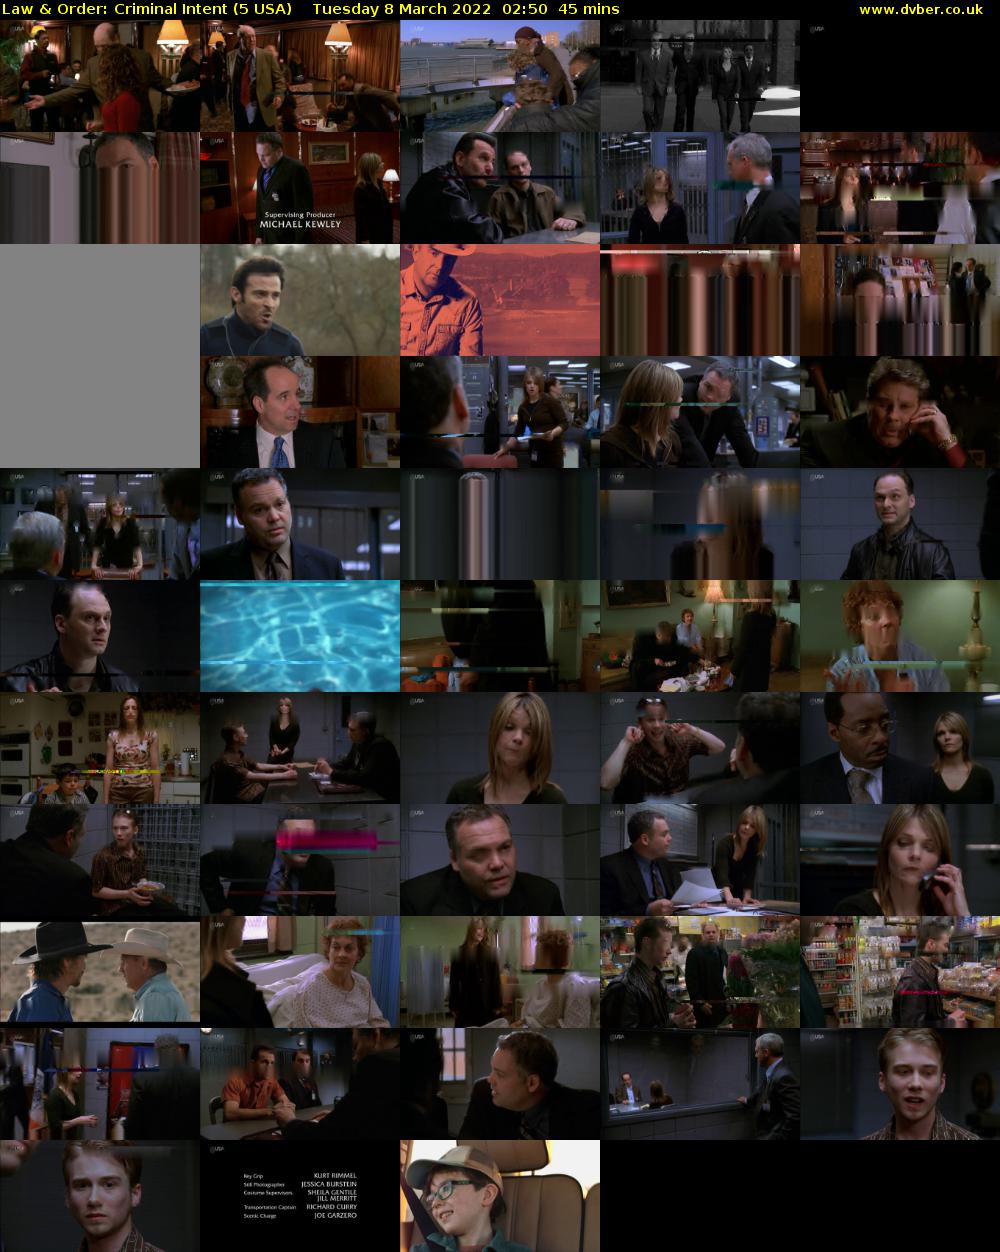 Law & Order: Criminal Intent (5 USA) Tuesday 8 March 2022 02:50 - 03:35